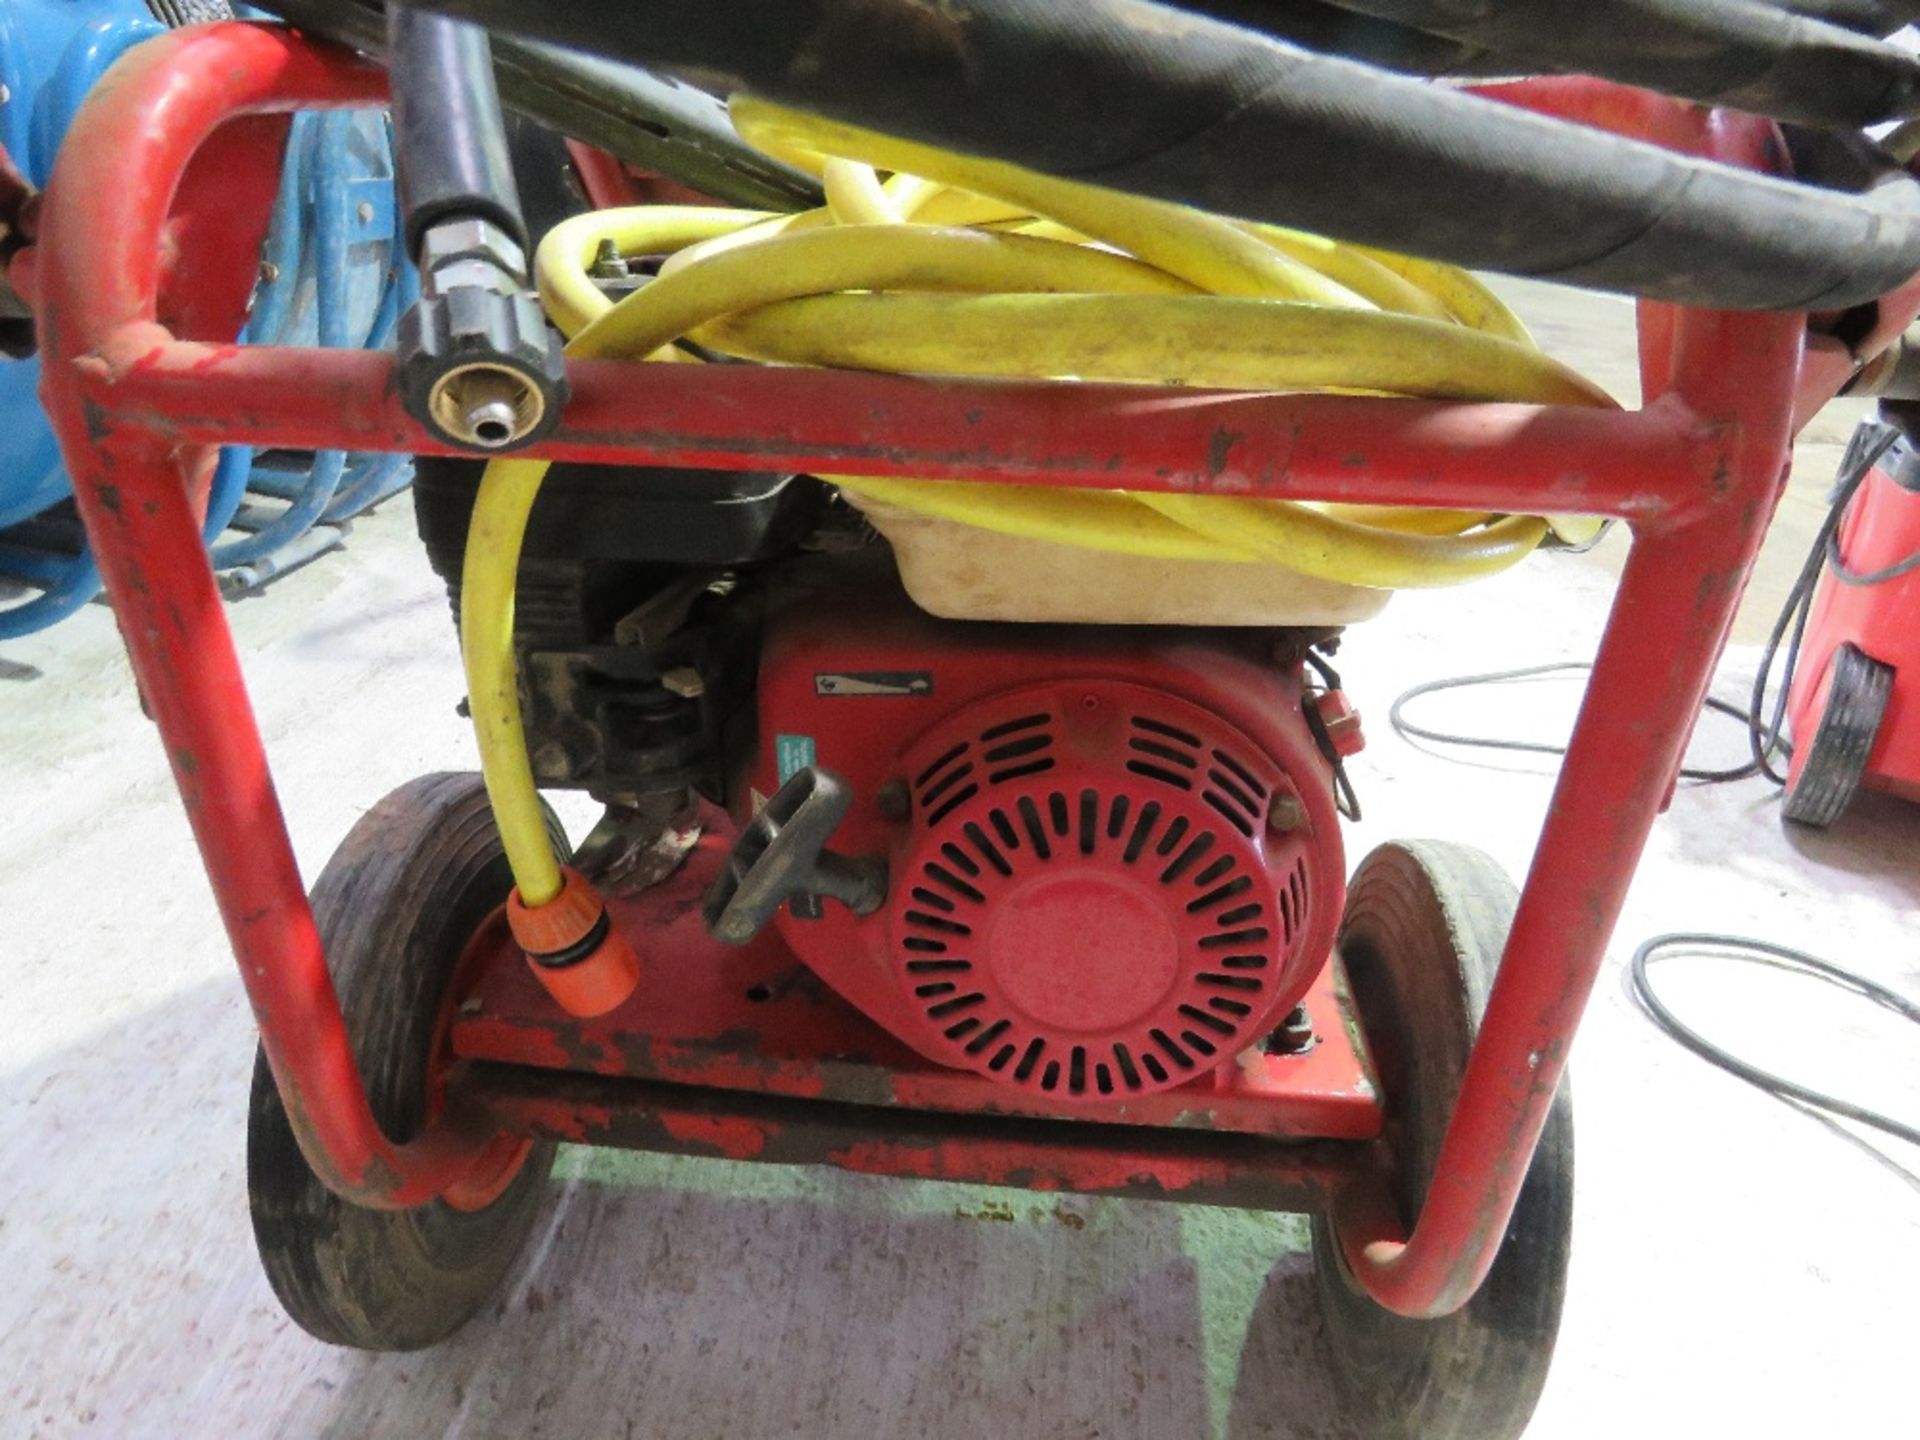 PETROL ENGINED PRESSURE WASHER WITH HOSE AND LANCE. - Image 6 of 6